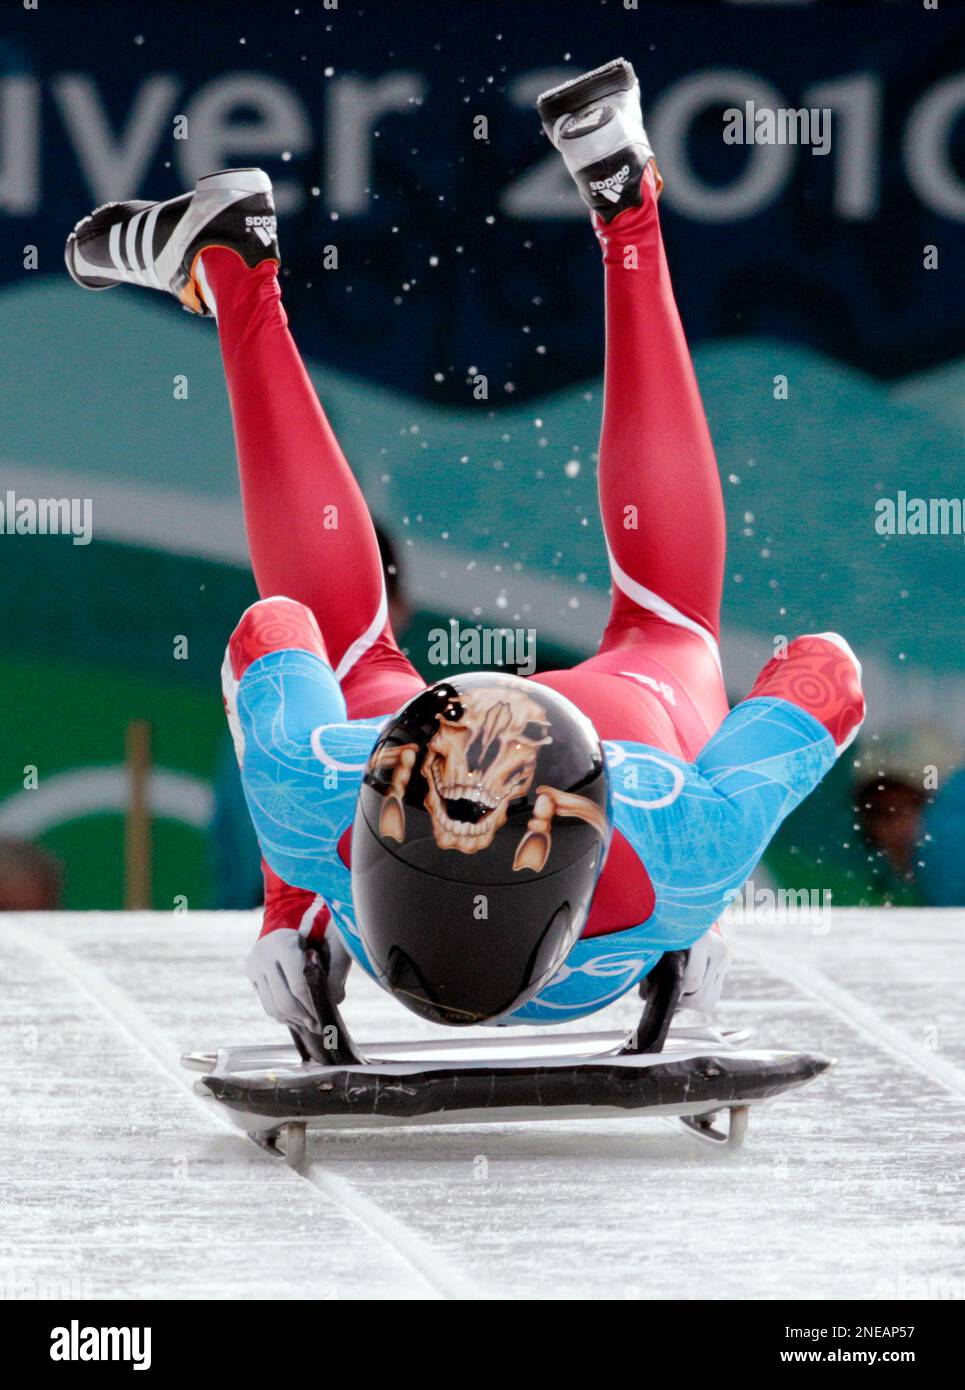 Melissa Hollingsworth of Canada starts during a training run for the women's skeleton at the Vancouver 2010 Olympics in Whistler, British Columbia, Monday, Feb. 15, 2010. (AP Photo/Elise Amendola) Stock Photo